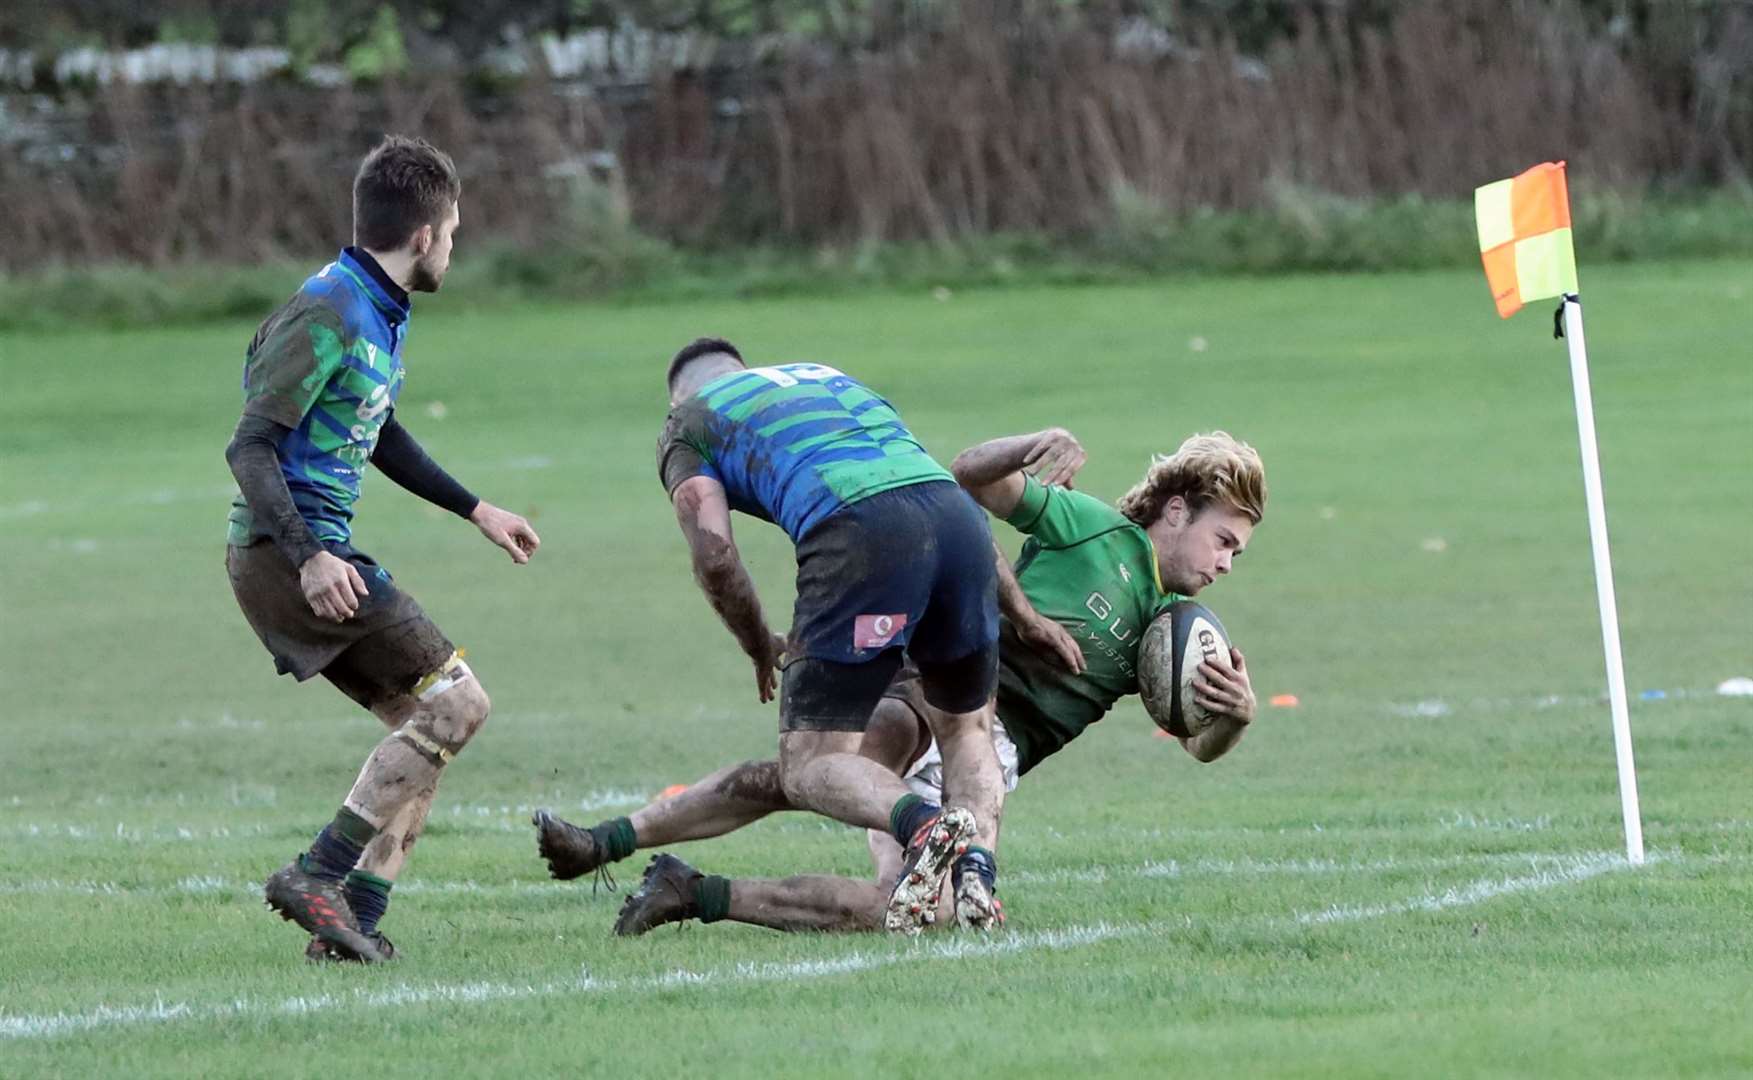 Ruaridh Mackay gets his first try for Caithness in the Caledonia Region Division 1 victory over Aberdeen Wanderers. Picture: James Gunn